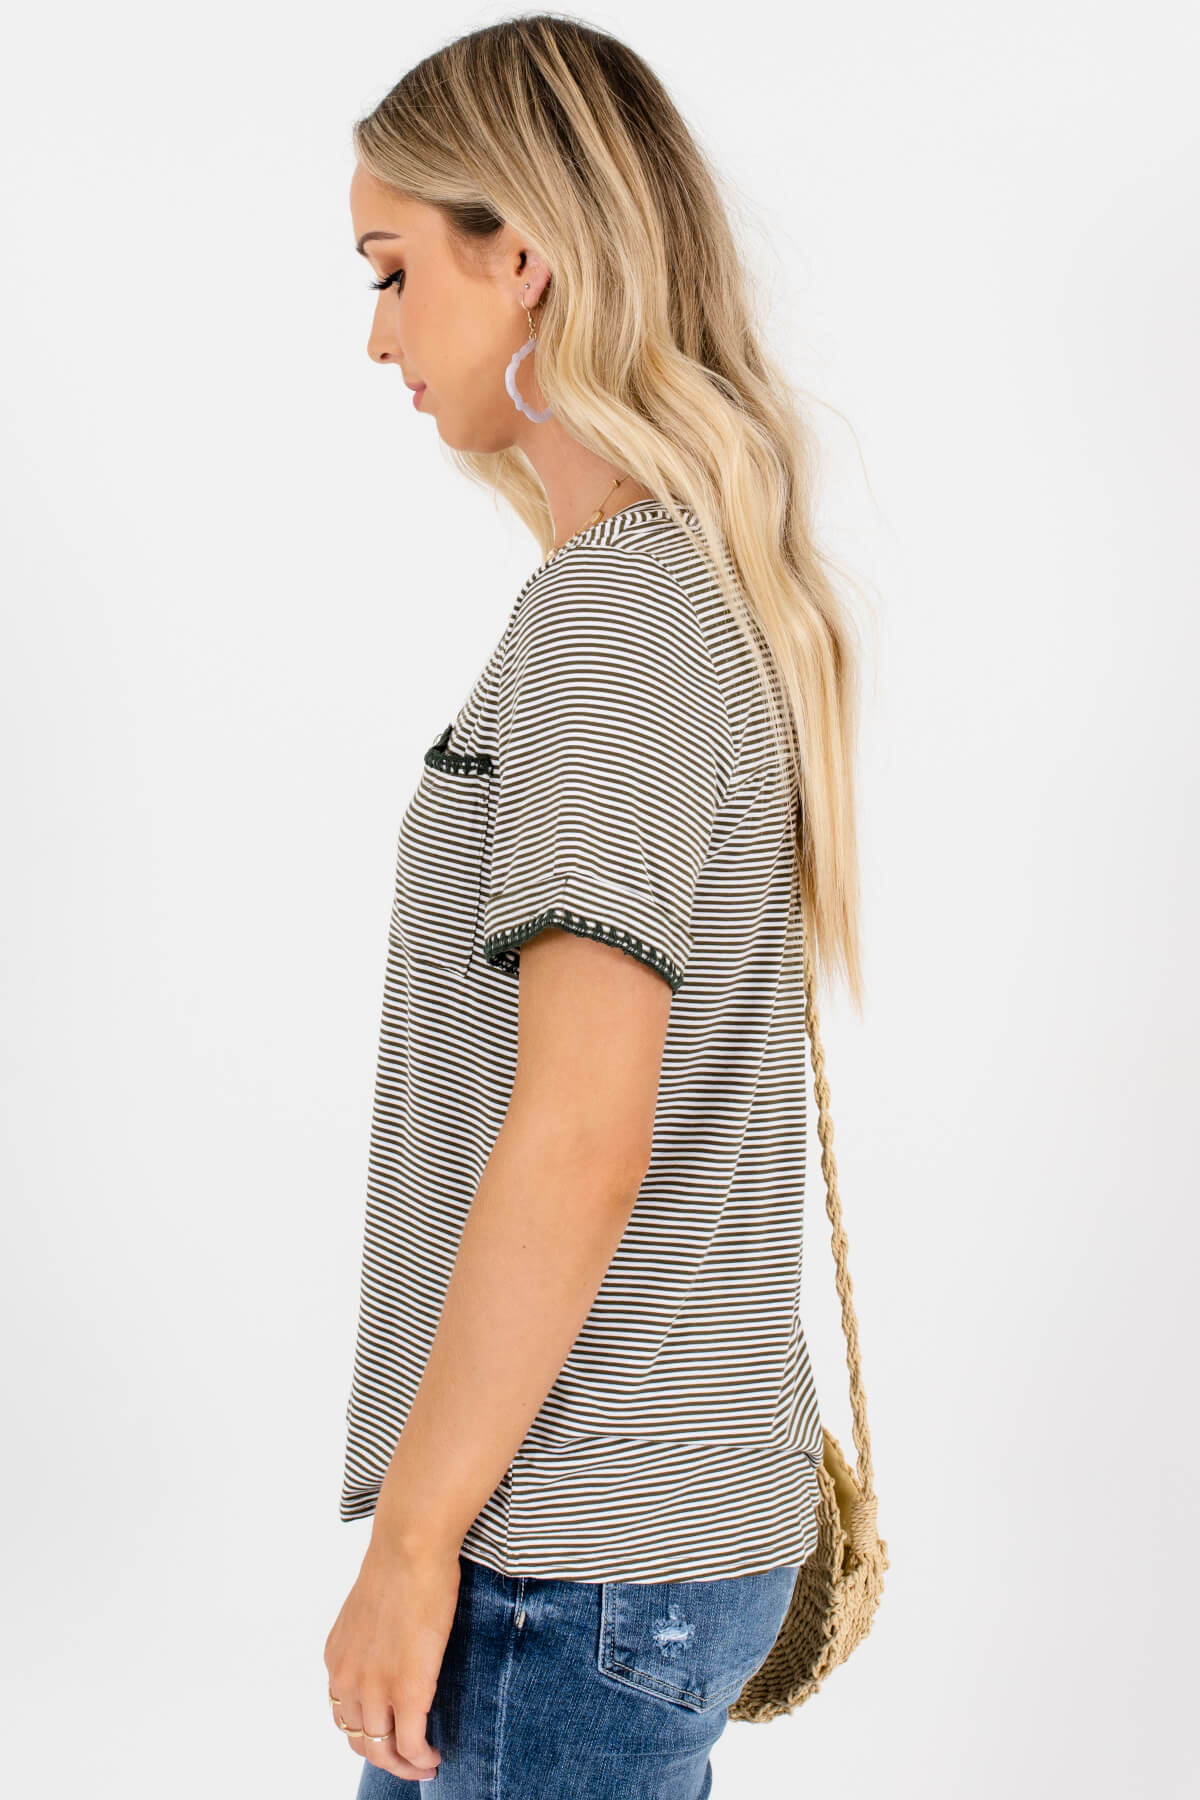 Olive Green White Striped Womens T-Shirts and Tees